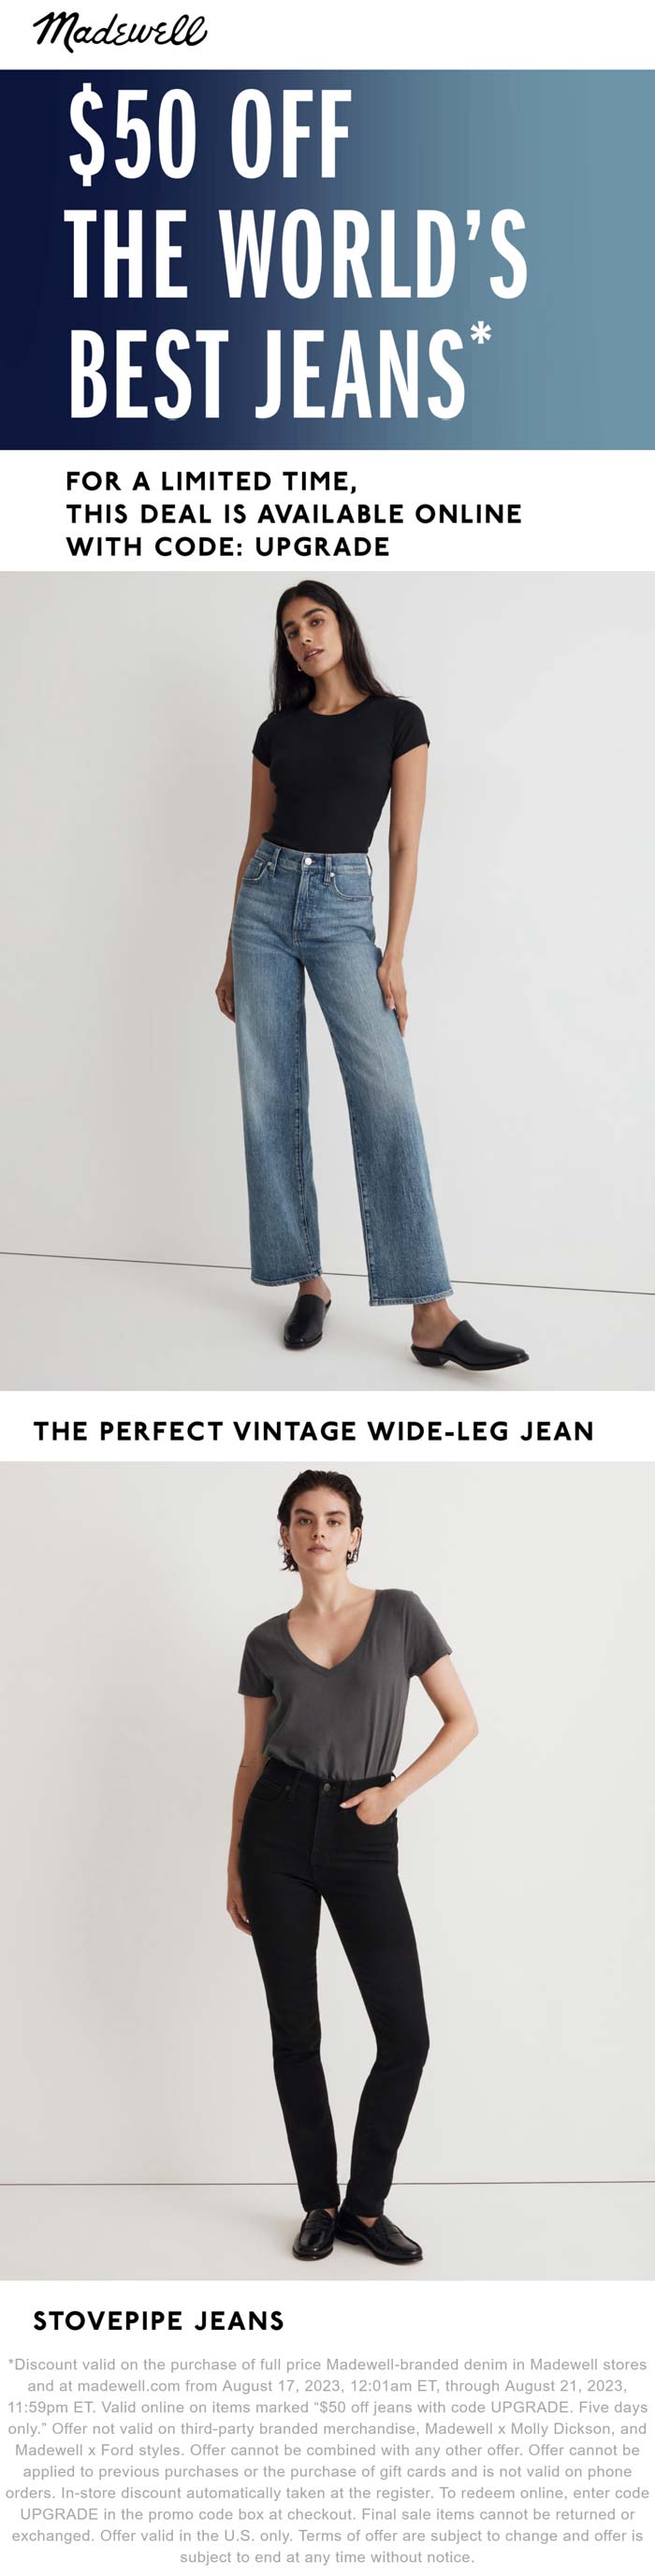 Madewell stores Coupon  $50 off jeans at Madewell, or online via promo code UPGRADE #madewell 